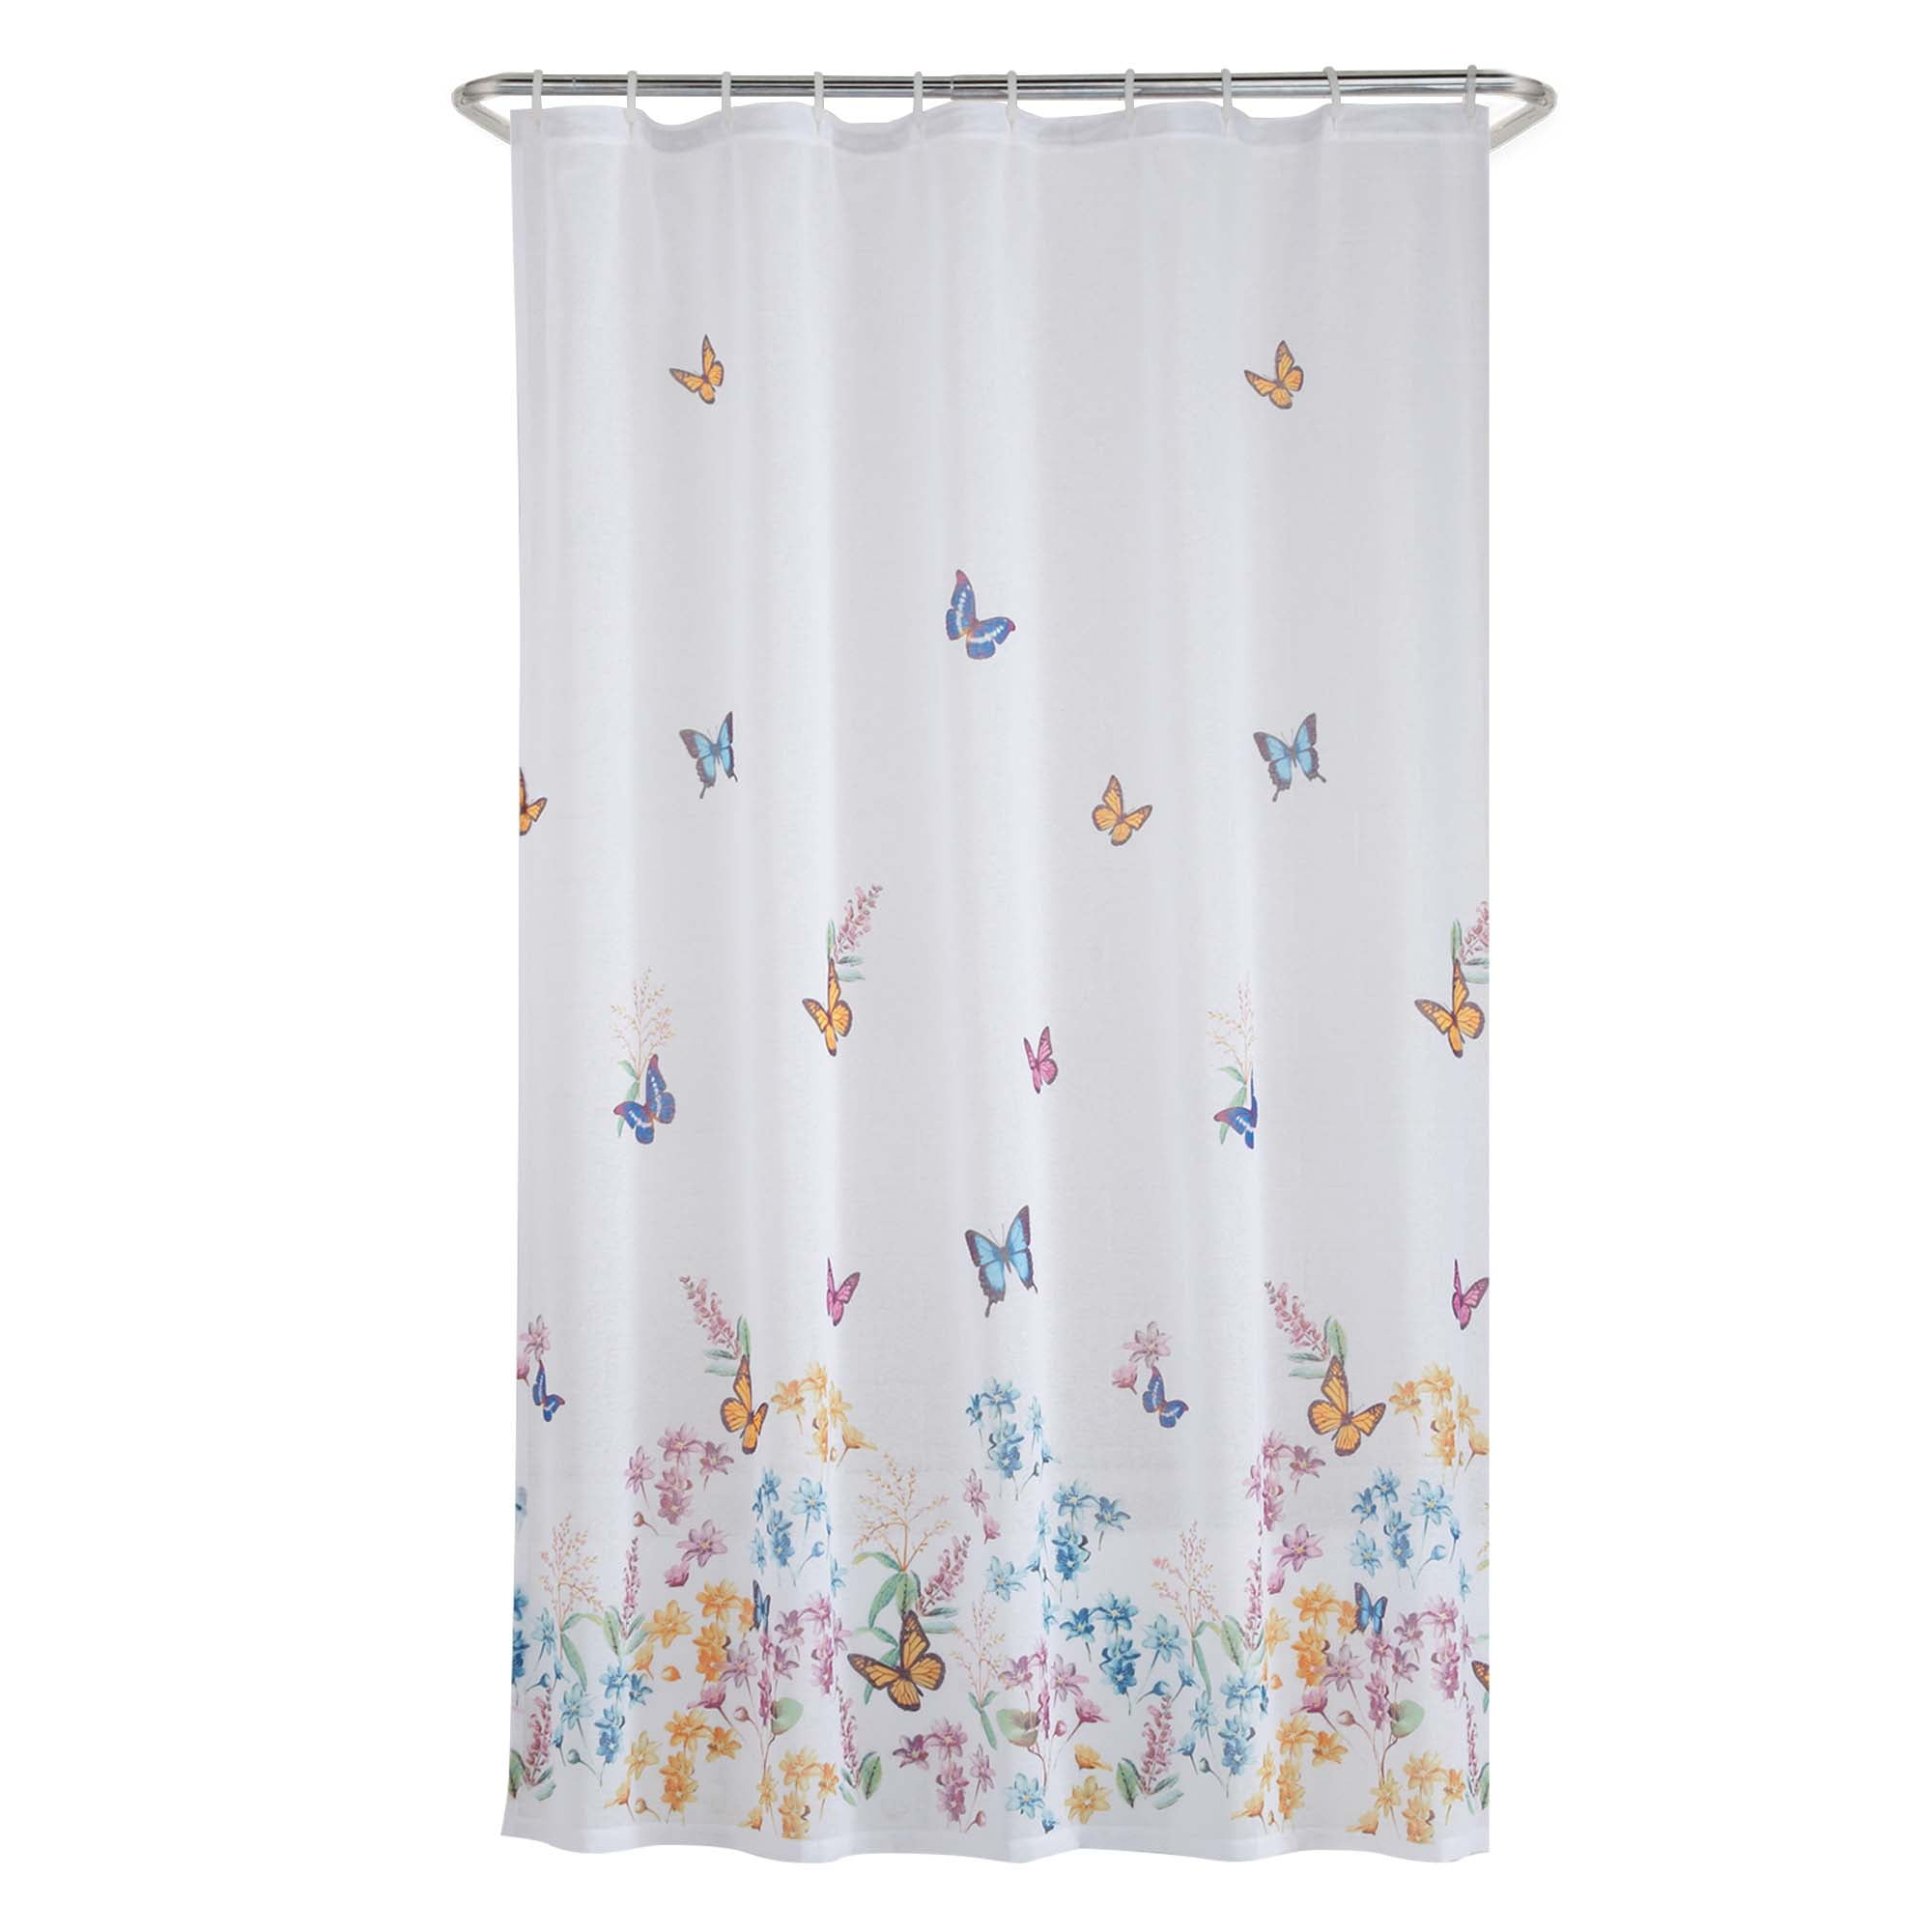 NWT-Mainstays Inspire Fabric Shower Curtain-Bible Quotes-Birds/Flowers/Butterfly 